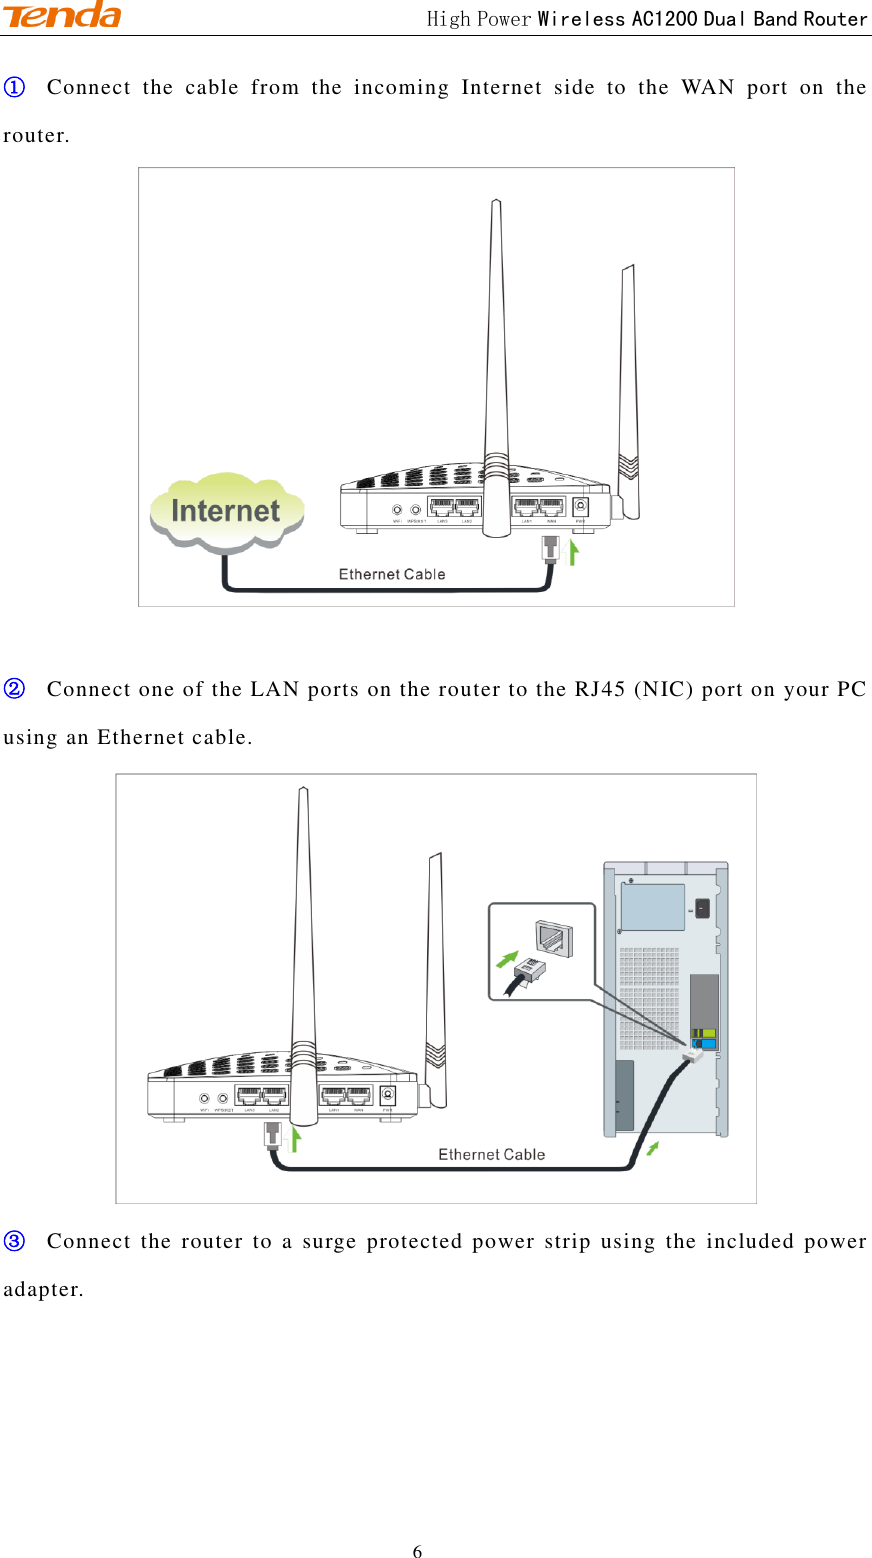                                             High Power Wireless AC1200 Dual Band Router 6 ① Connect  the  cable  from  the  incoming  Internet  side  to  the  WAN  port  on  the router.   ② Connect one of the LAN ports on the router to the RJ45 (NIC) port on your PC using an Ethernet cable.  ③ Connect the  router  to  a  surge protected power  strip  using  the  included  power adapter. 